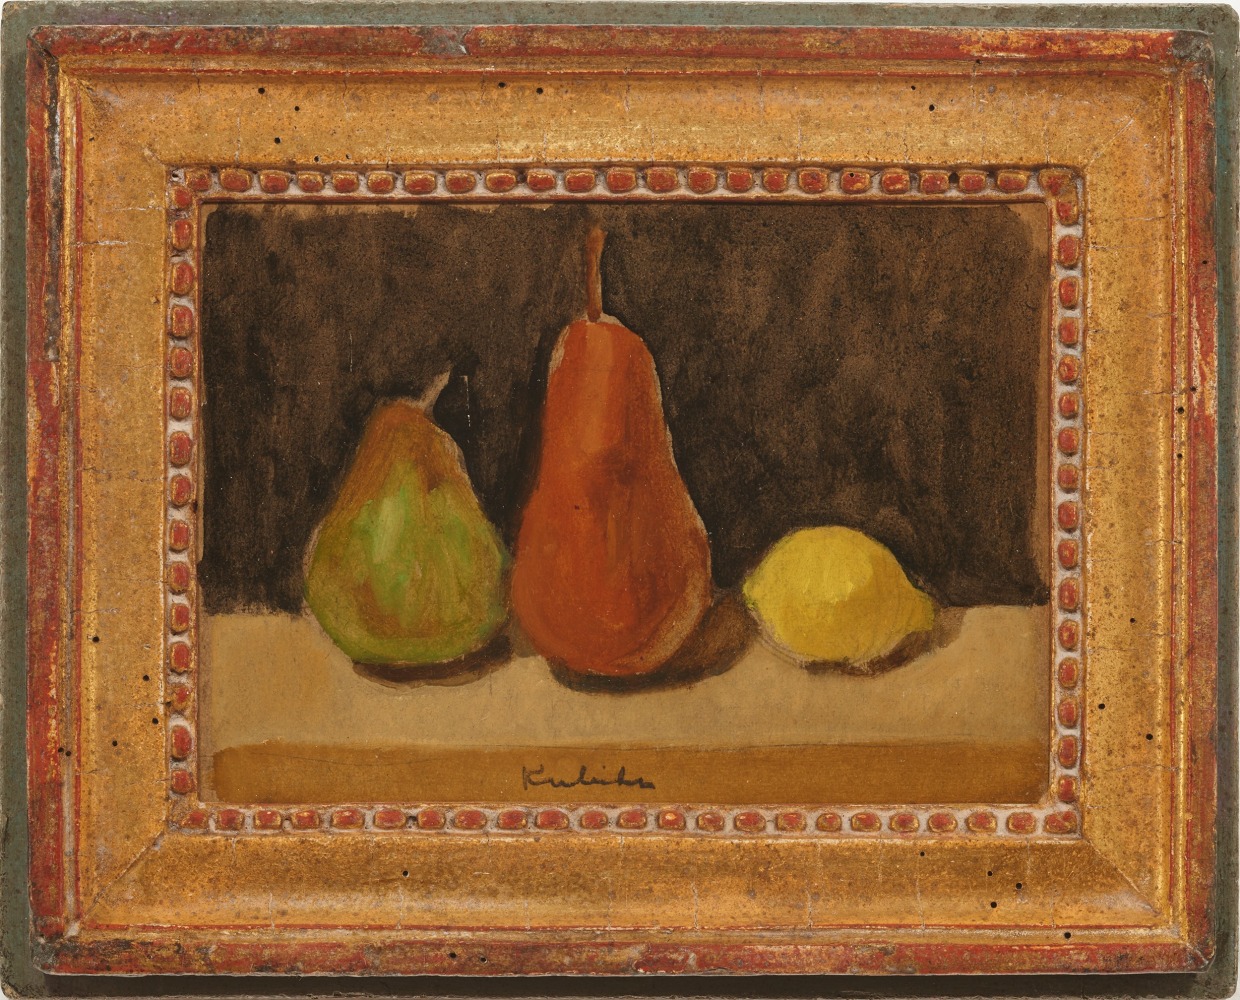 Robert M. Kulicke Two Pears and a Lemon on a Brown Surface against a Black Background, n.d. oil on cardboard 6 1/8 x 8 9/16 in.